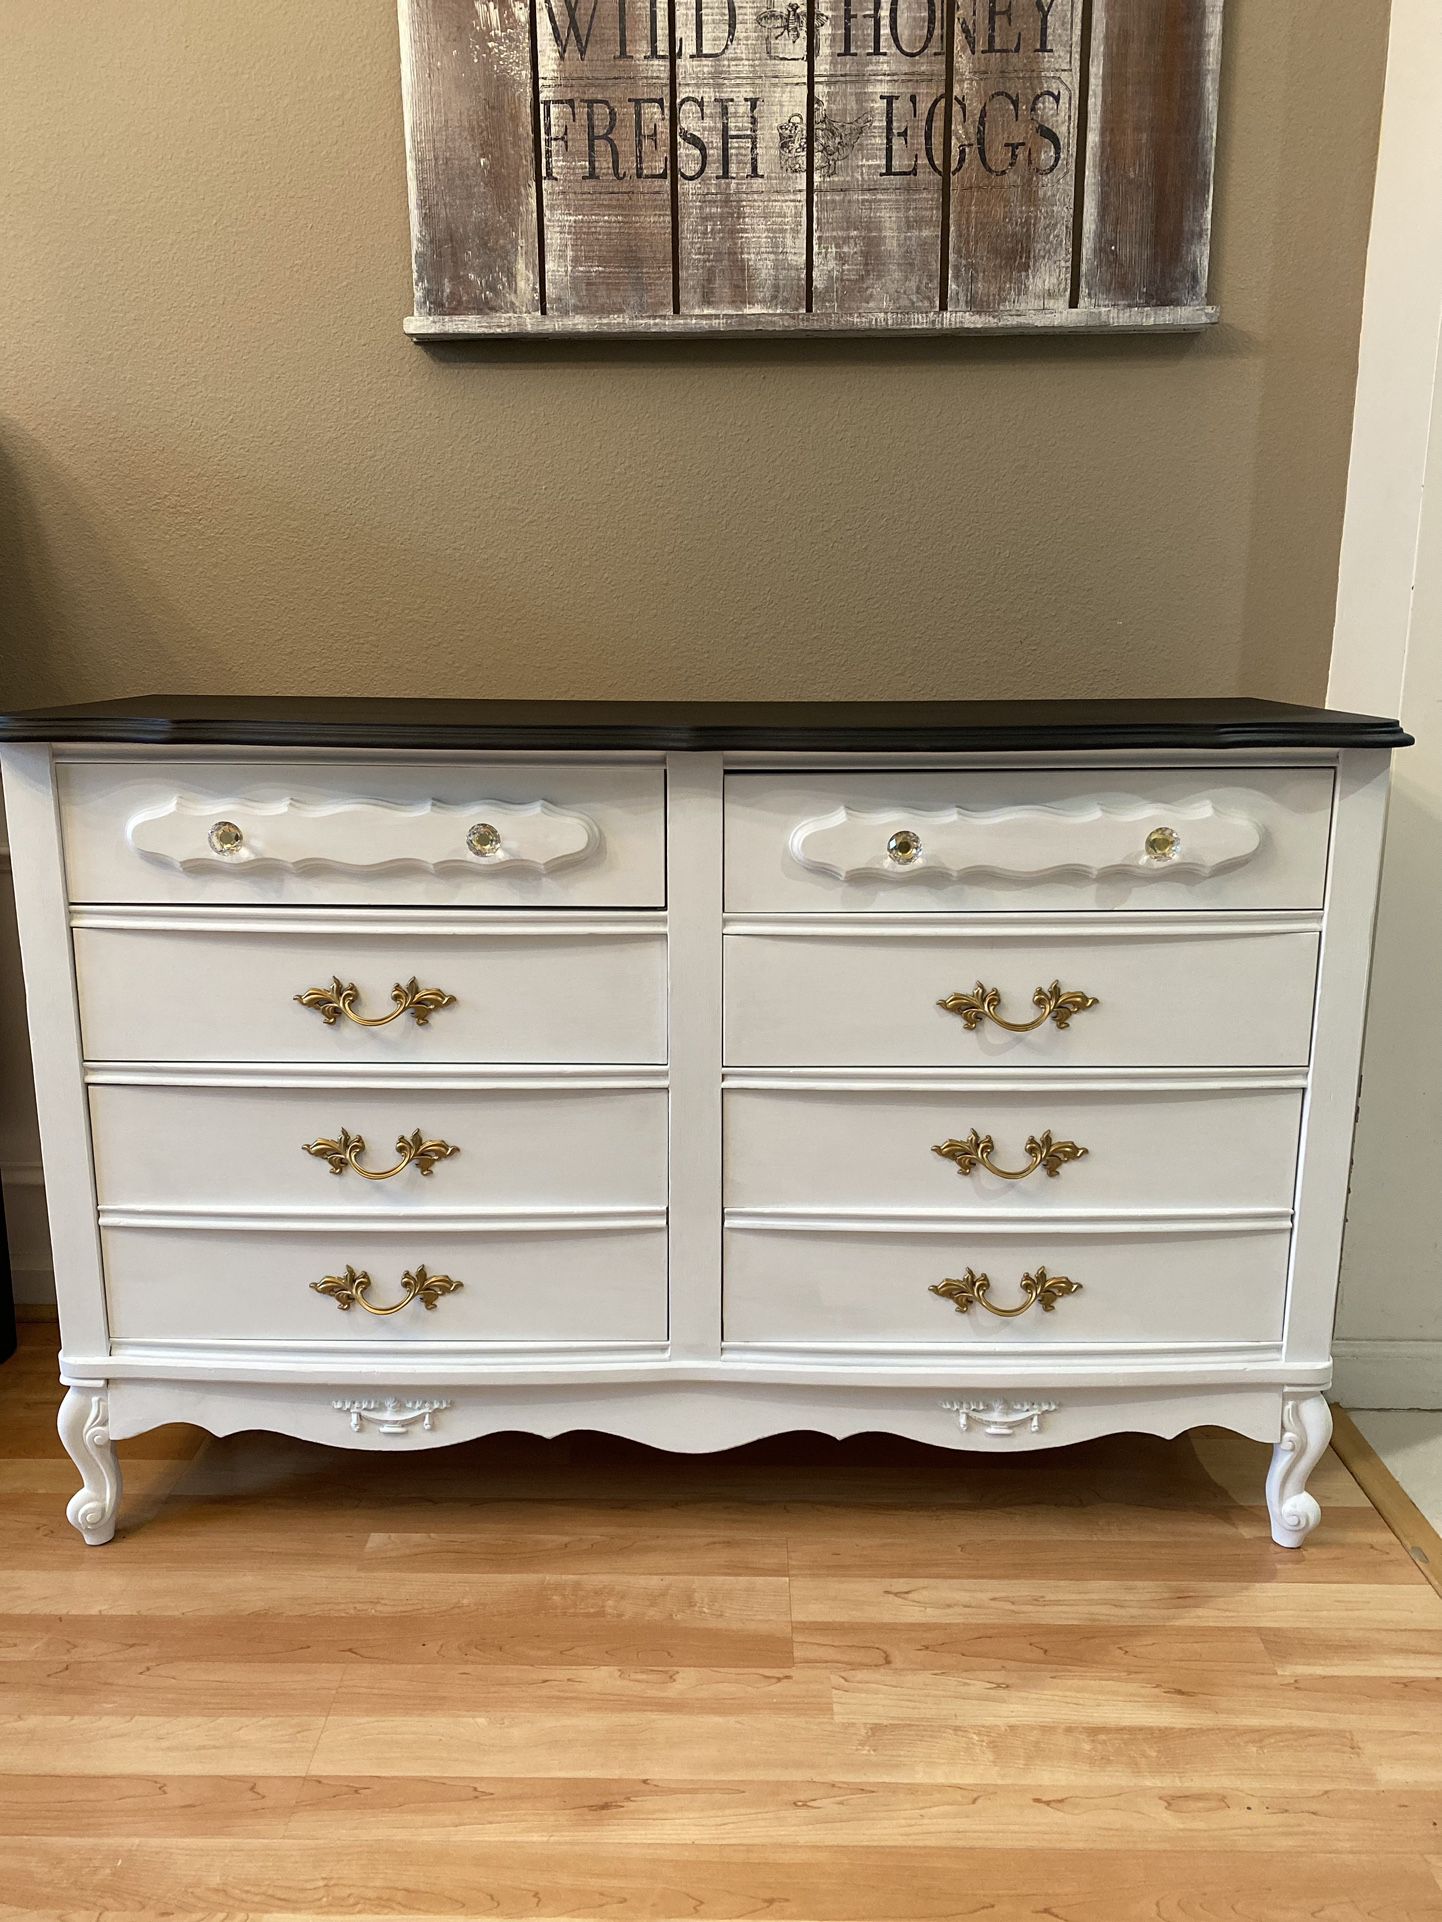 French Provincial Dresser Refinished